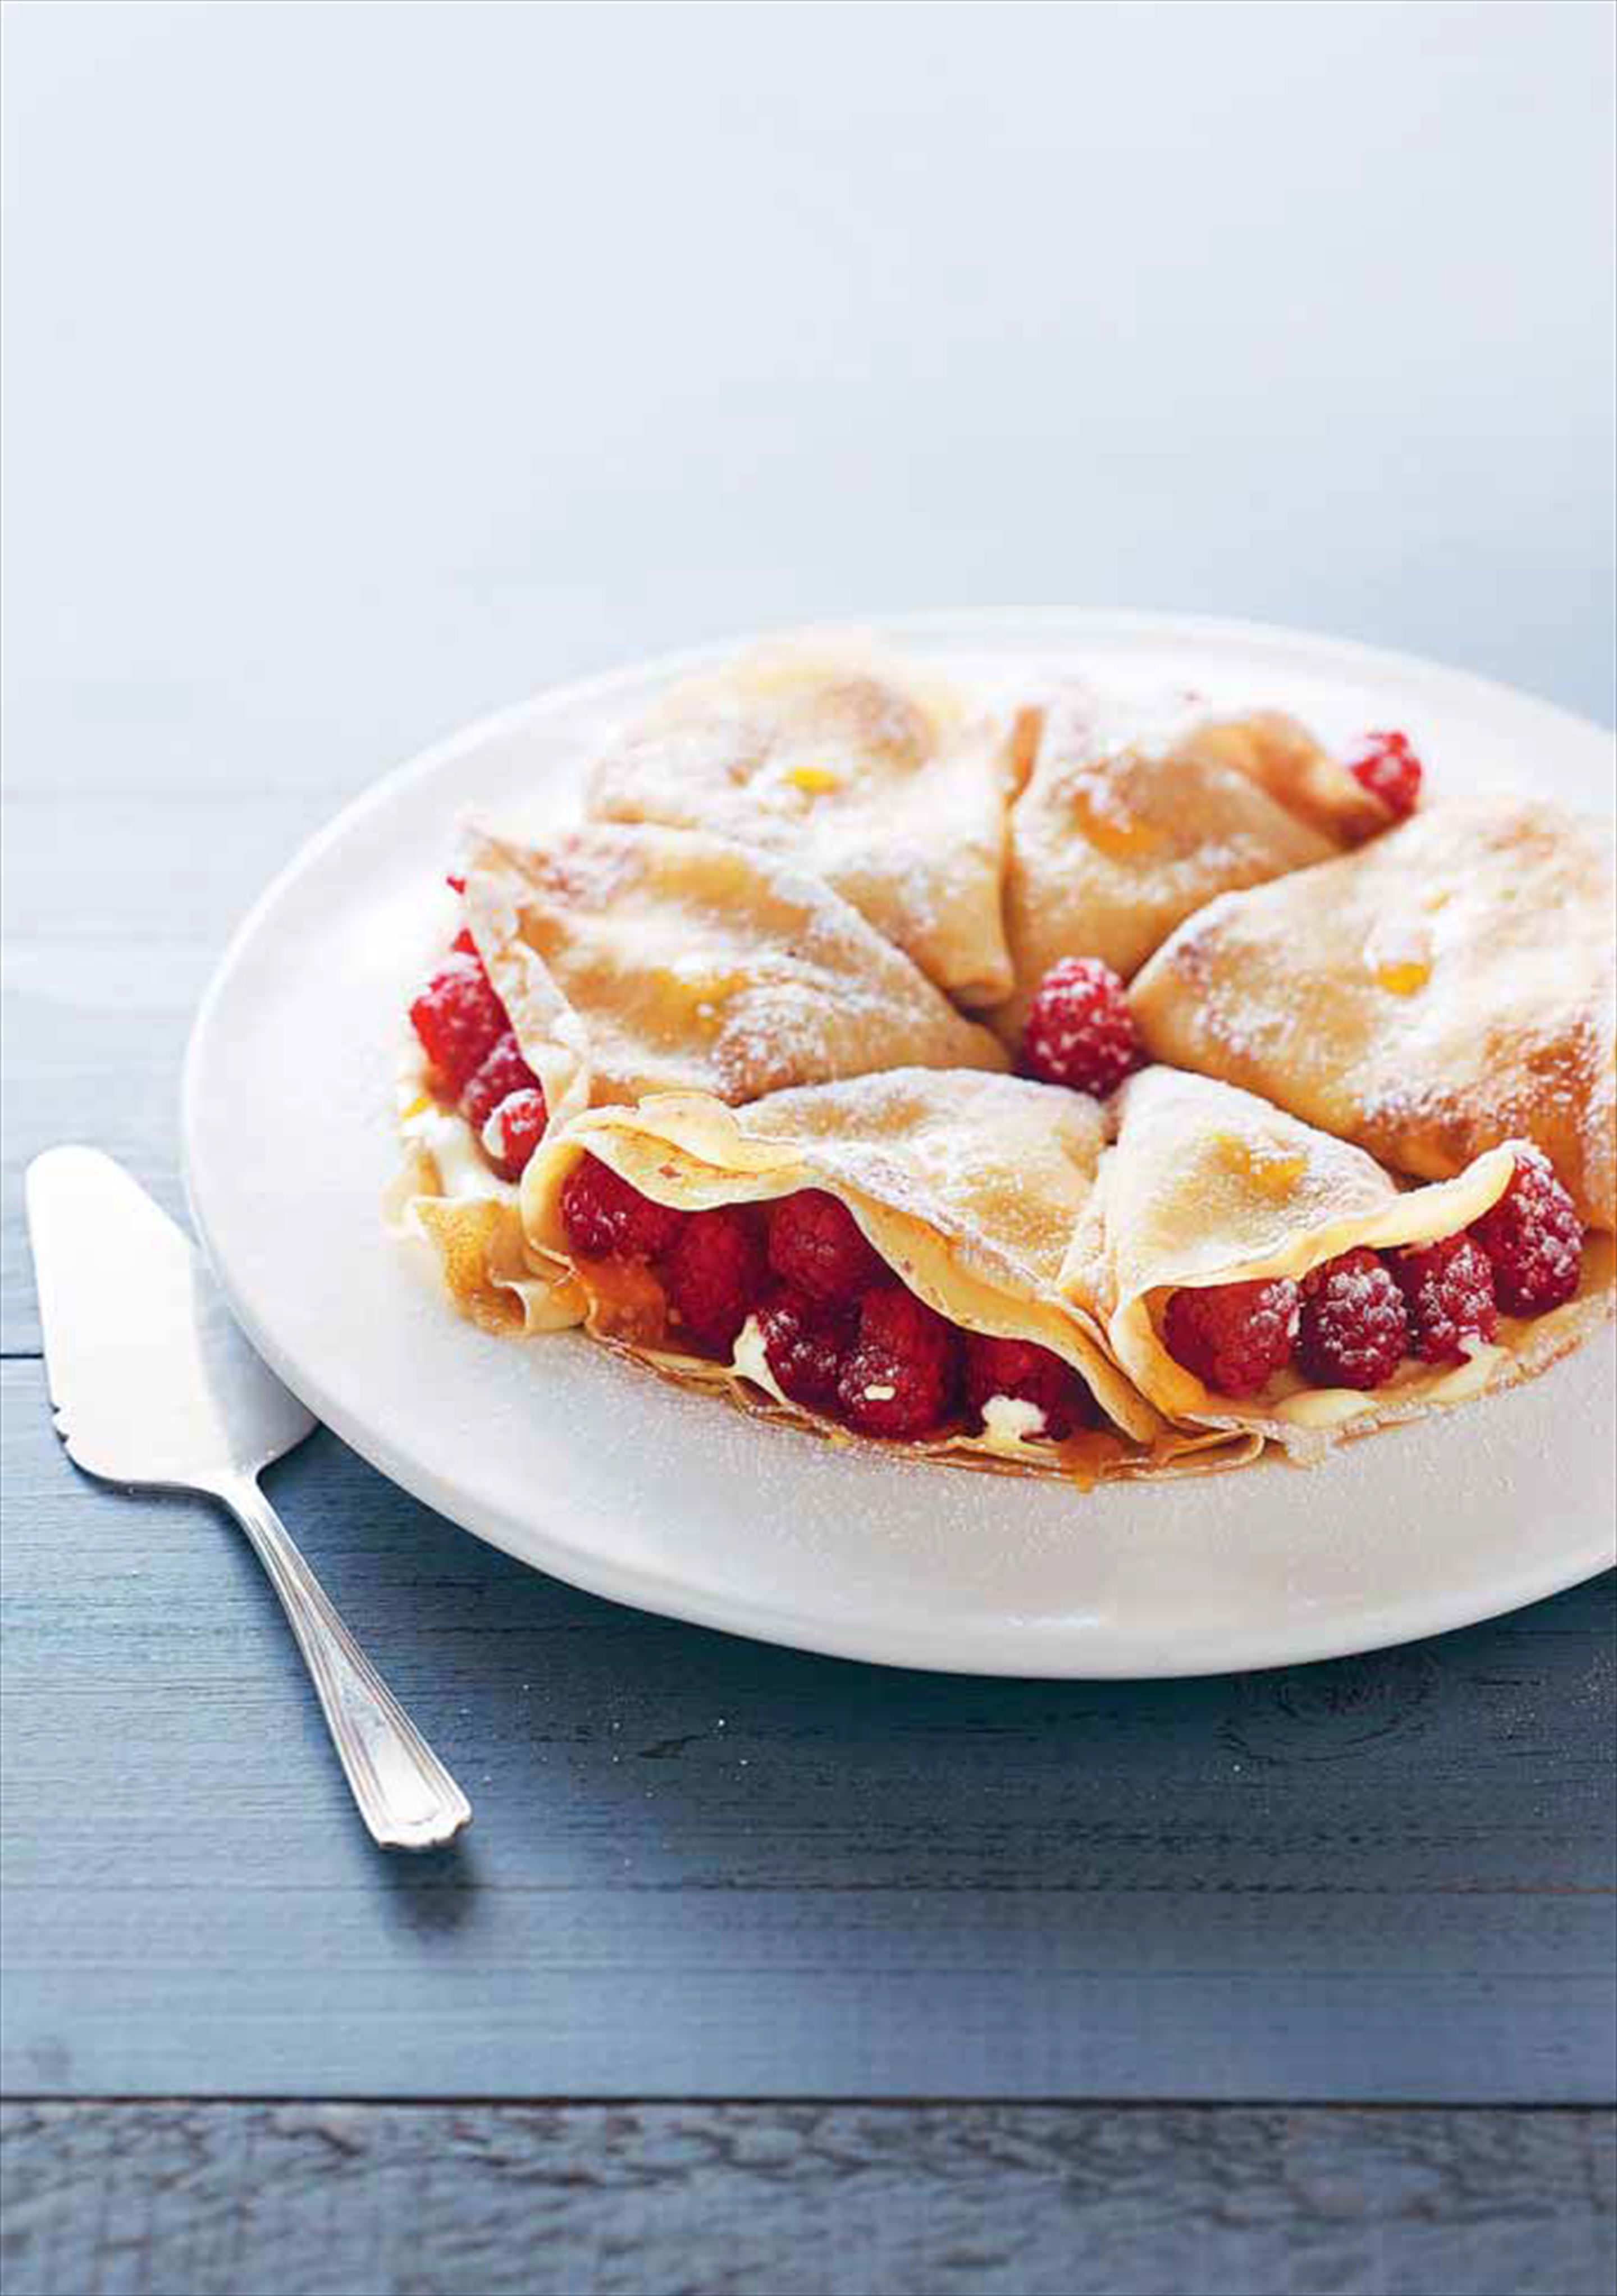 Crepes with raspberries and marmalade